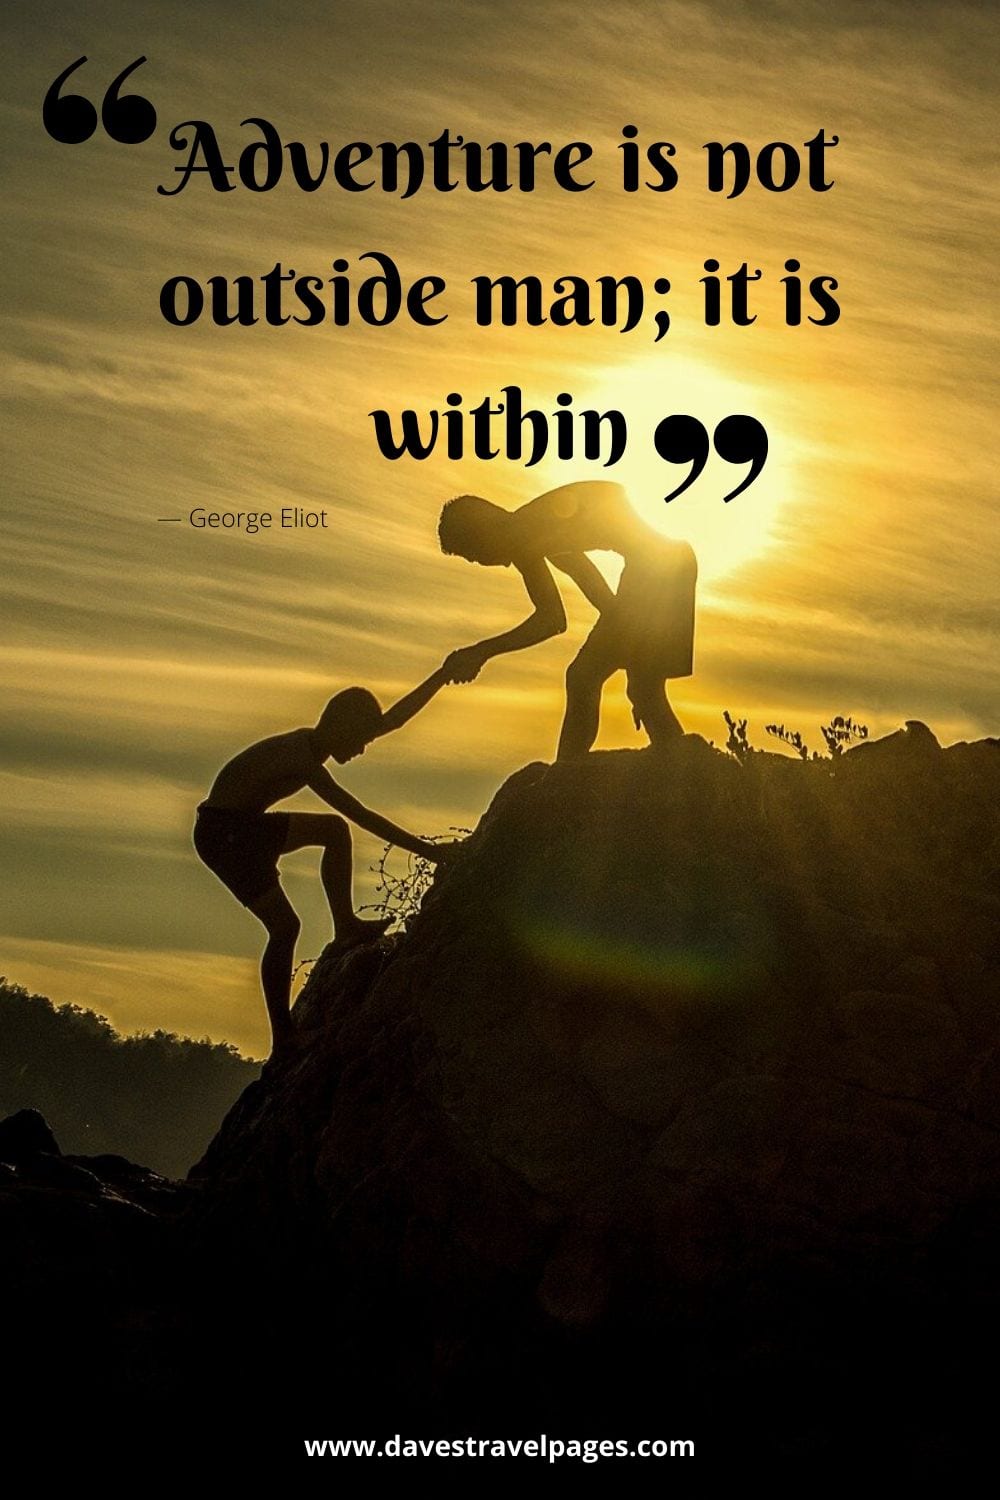 Adventure captions - “Adventure is not outside man; it is within.”― George Eliot